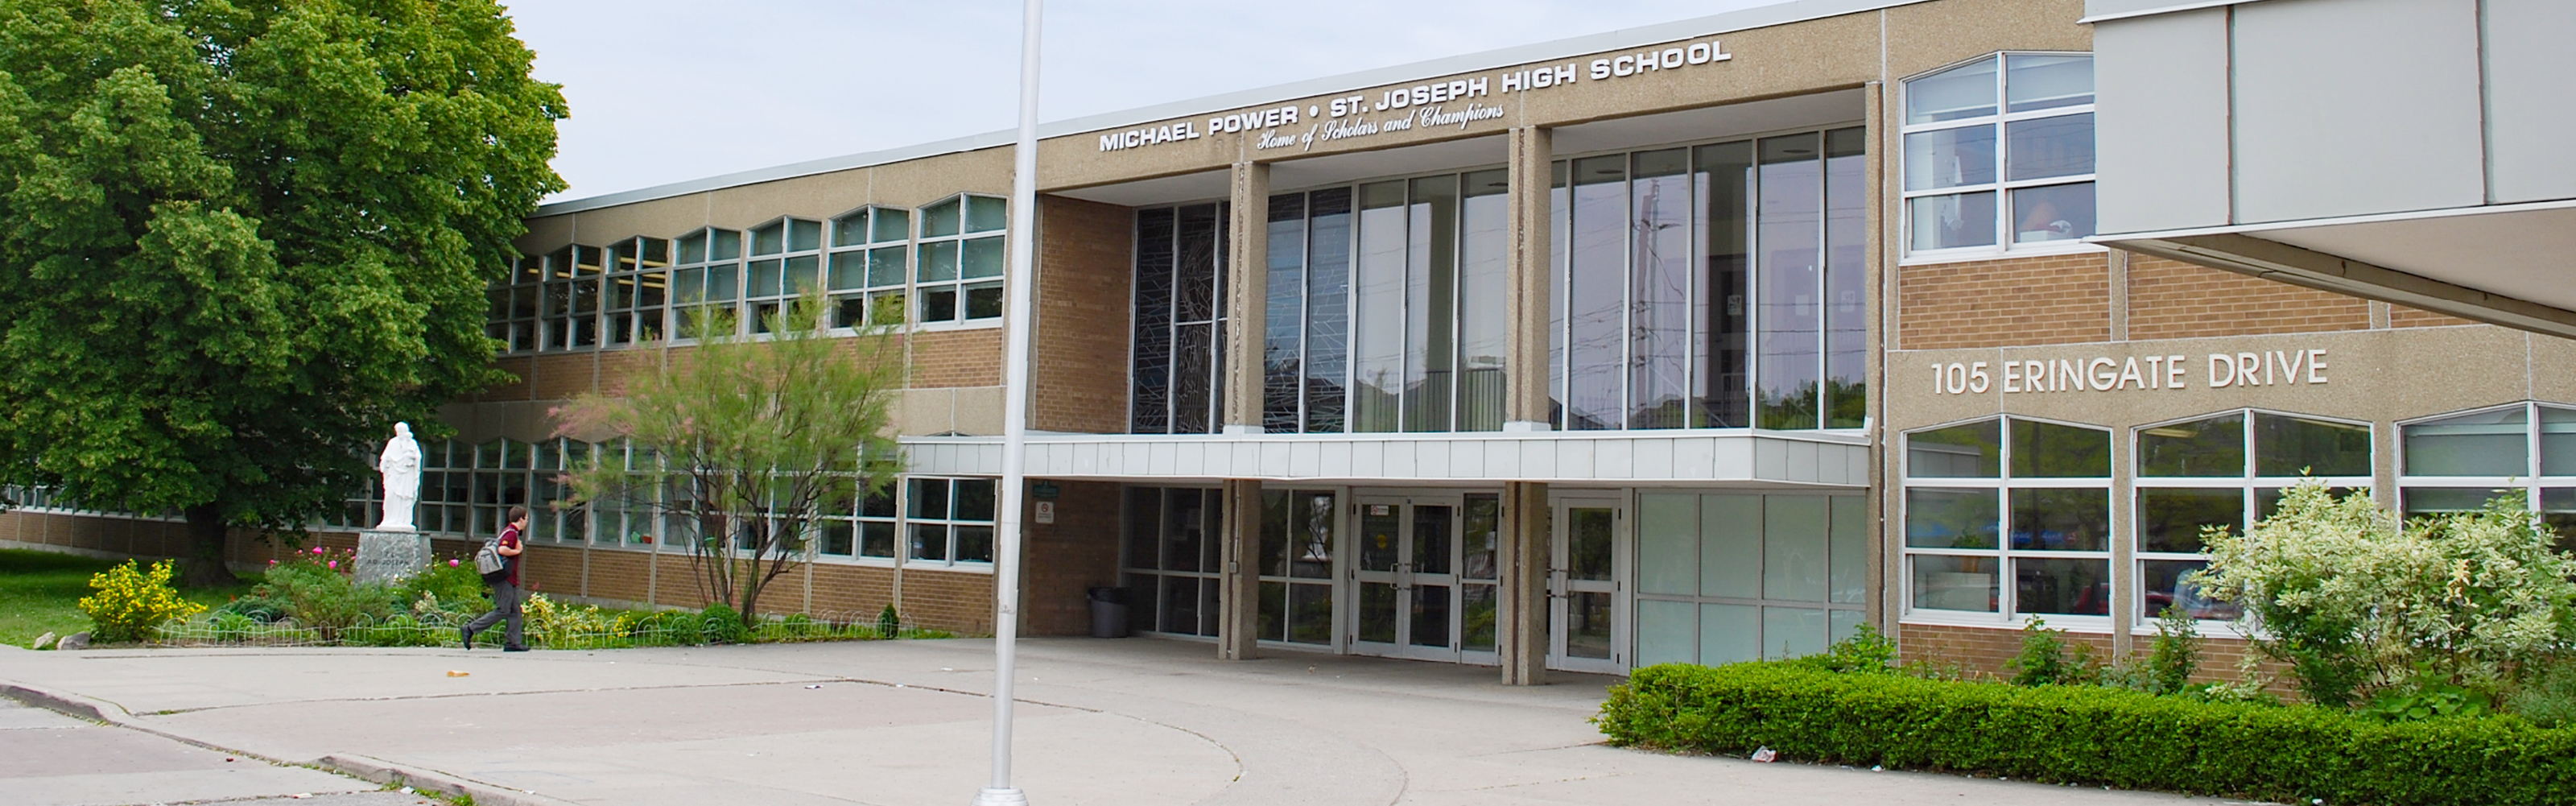 Front of the Michael Power - St. Joseph High School building